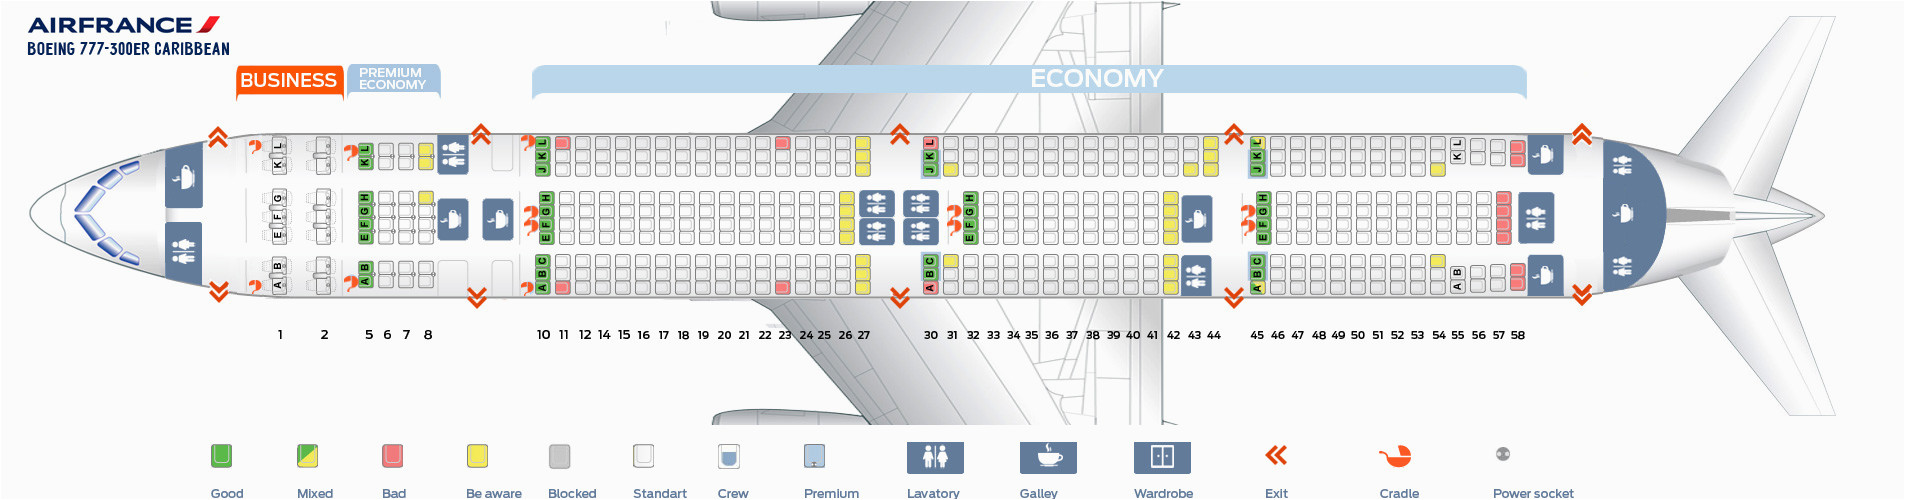 seating chart boeing 777 300er air france elcho table